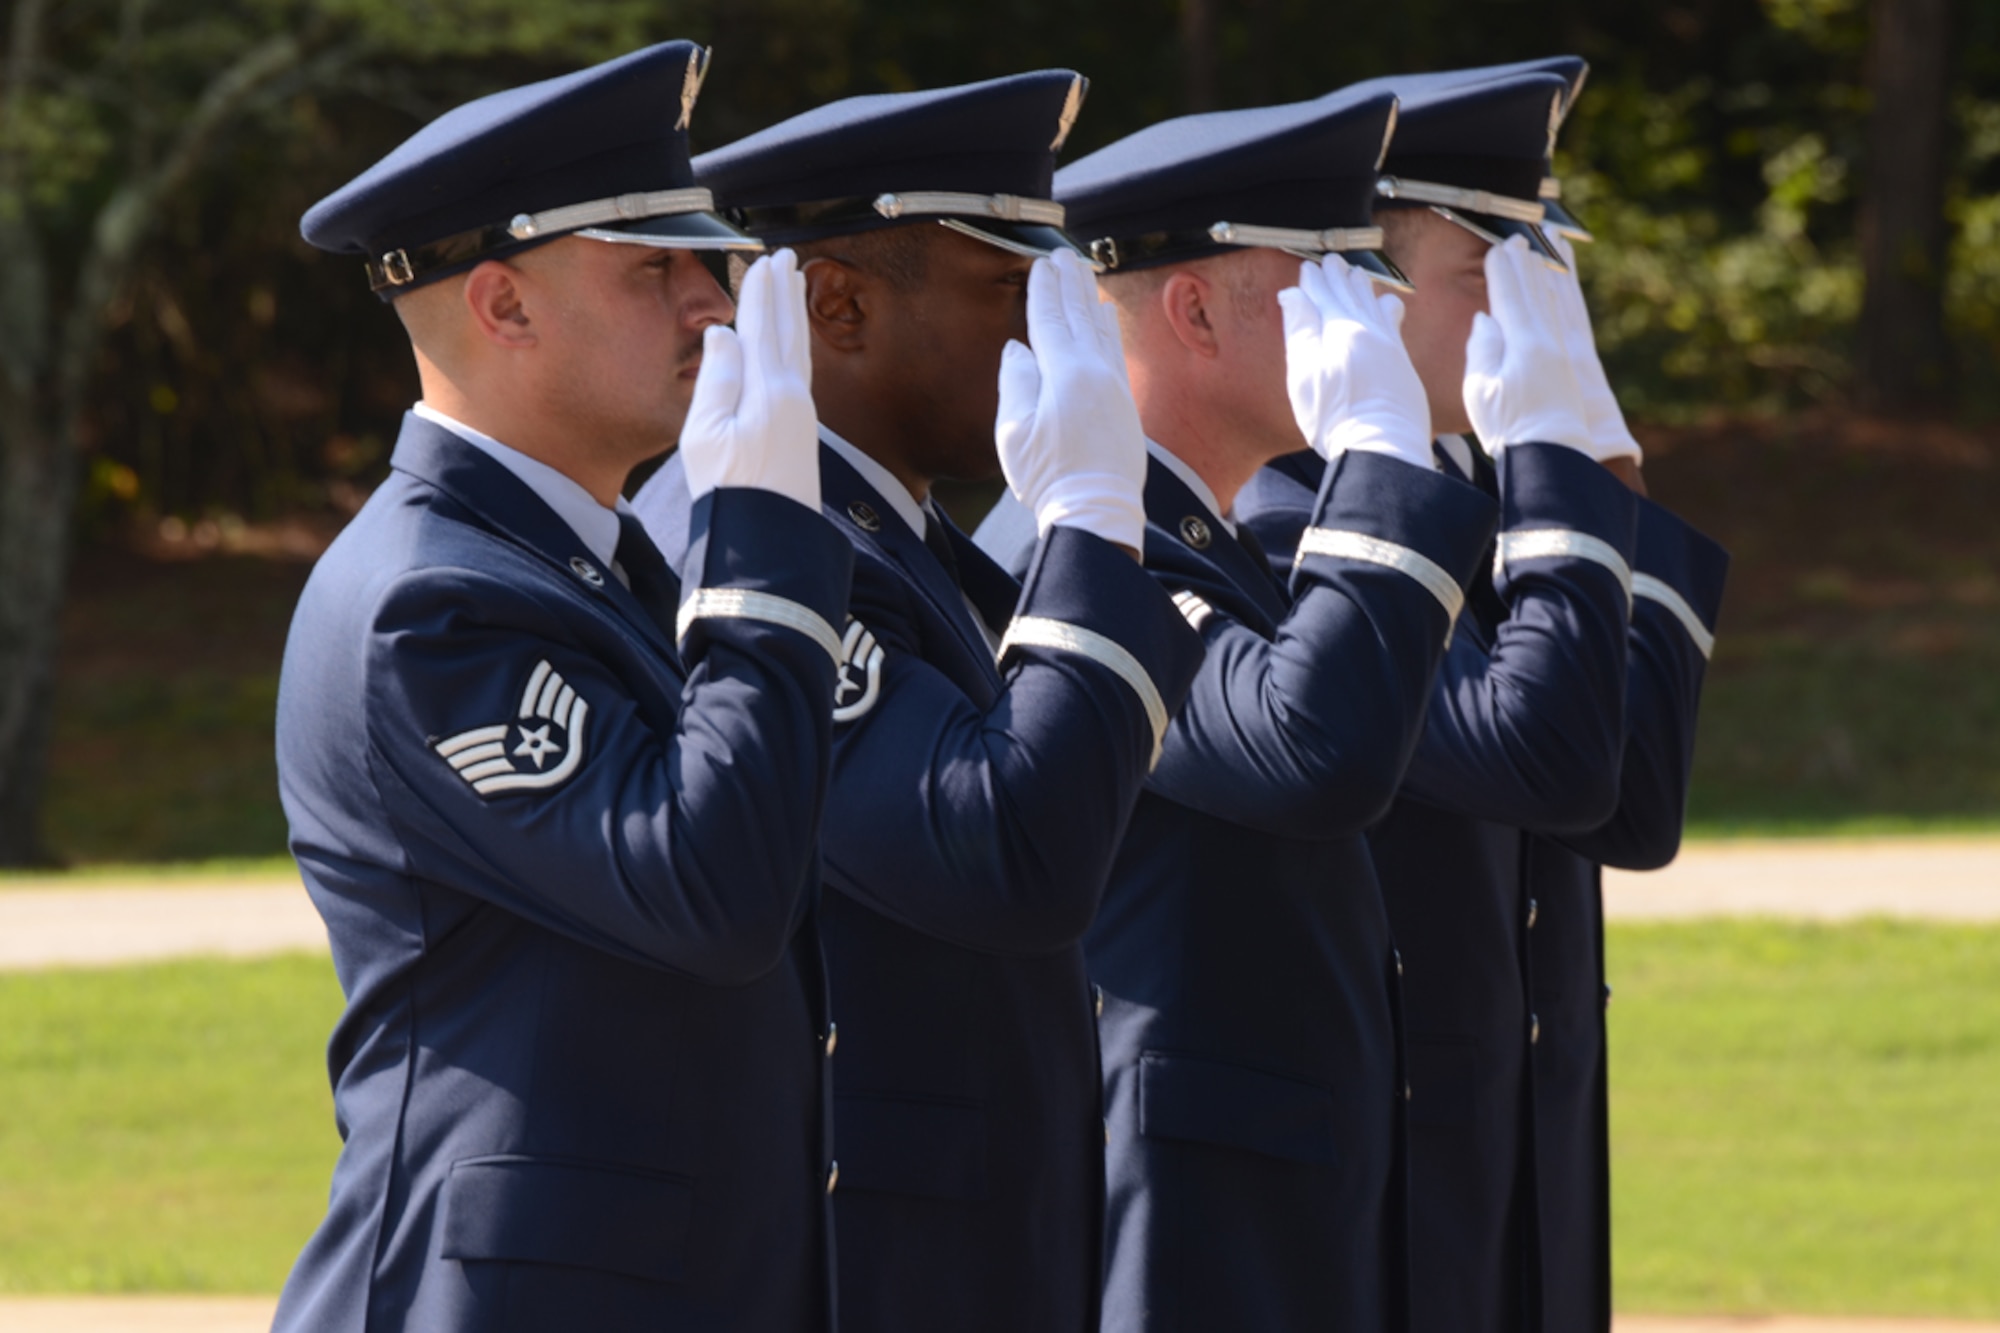 The 94th Airlift Wing Honor Guard is accepting applications for prospective members. Submission of an application does not guarantee selection. Please visit Master Sgt. Albright in building 838, suite 1309, call (678) 655-5272 or email aaron.albright@us.af.mil if interested. (U.S. Air Force photo/Brad Fallin) 